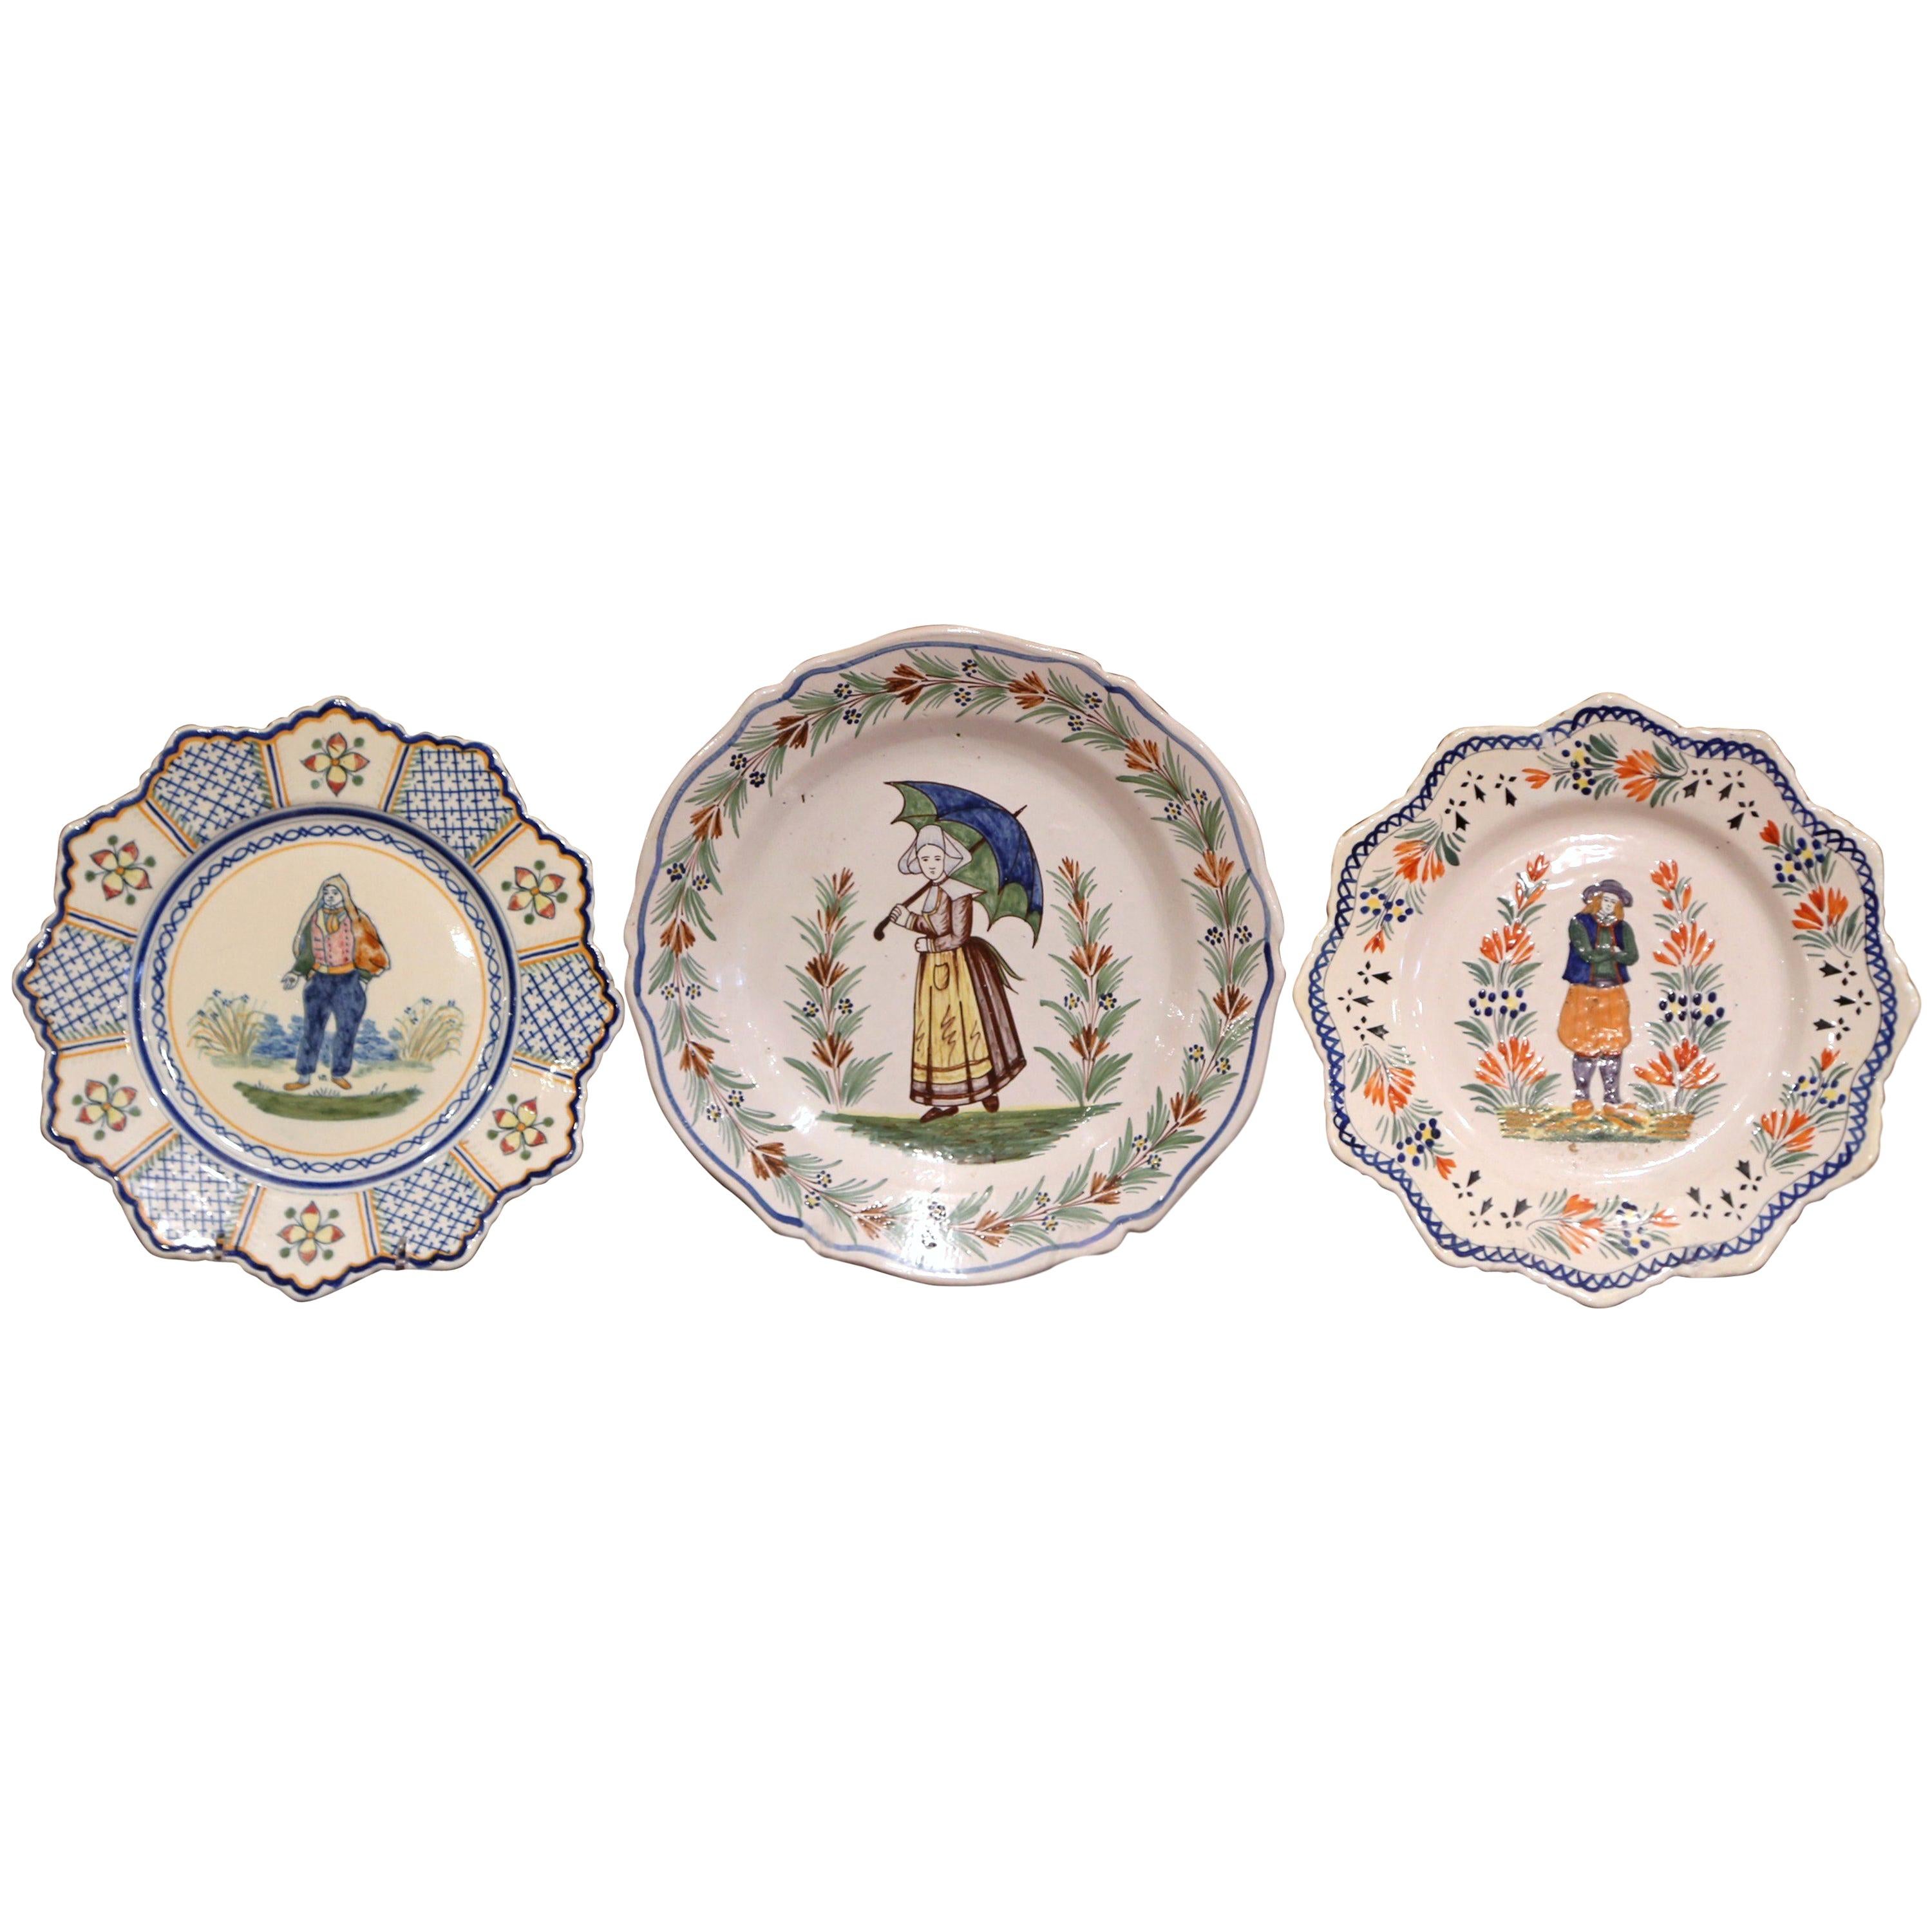 Three French Antique Hand Painted Faience Plates from Henriot Quimper